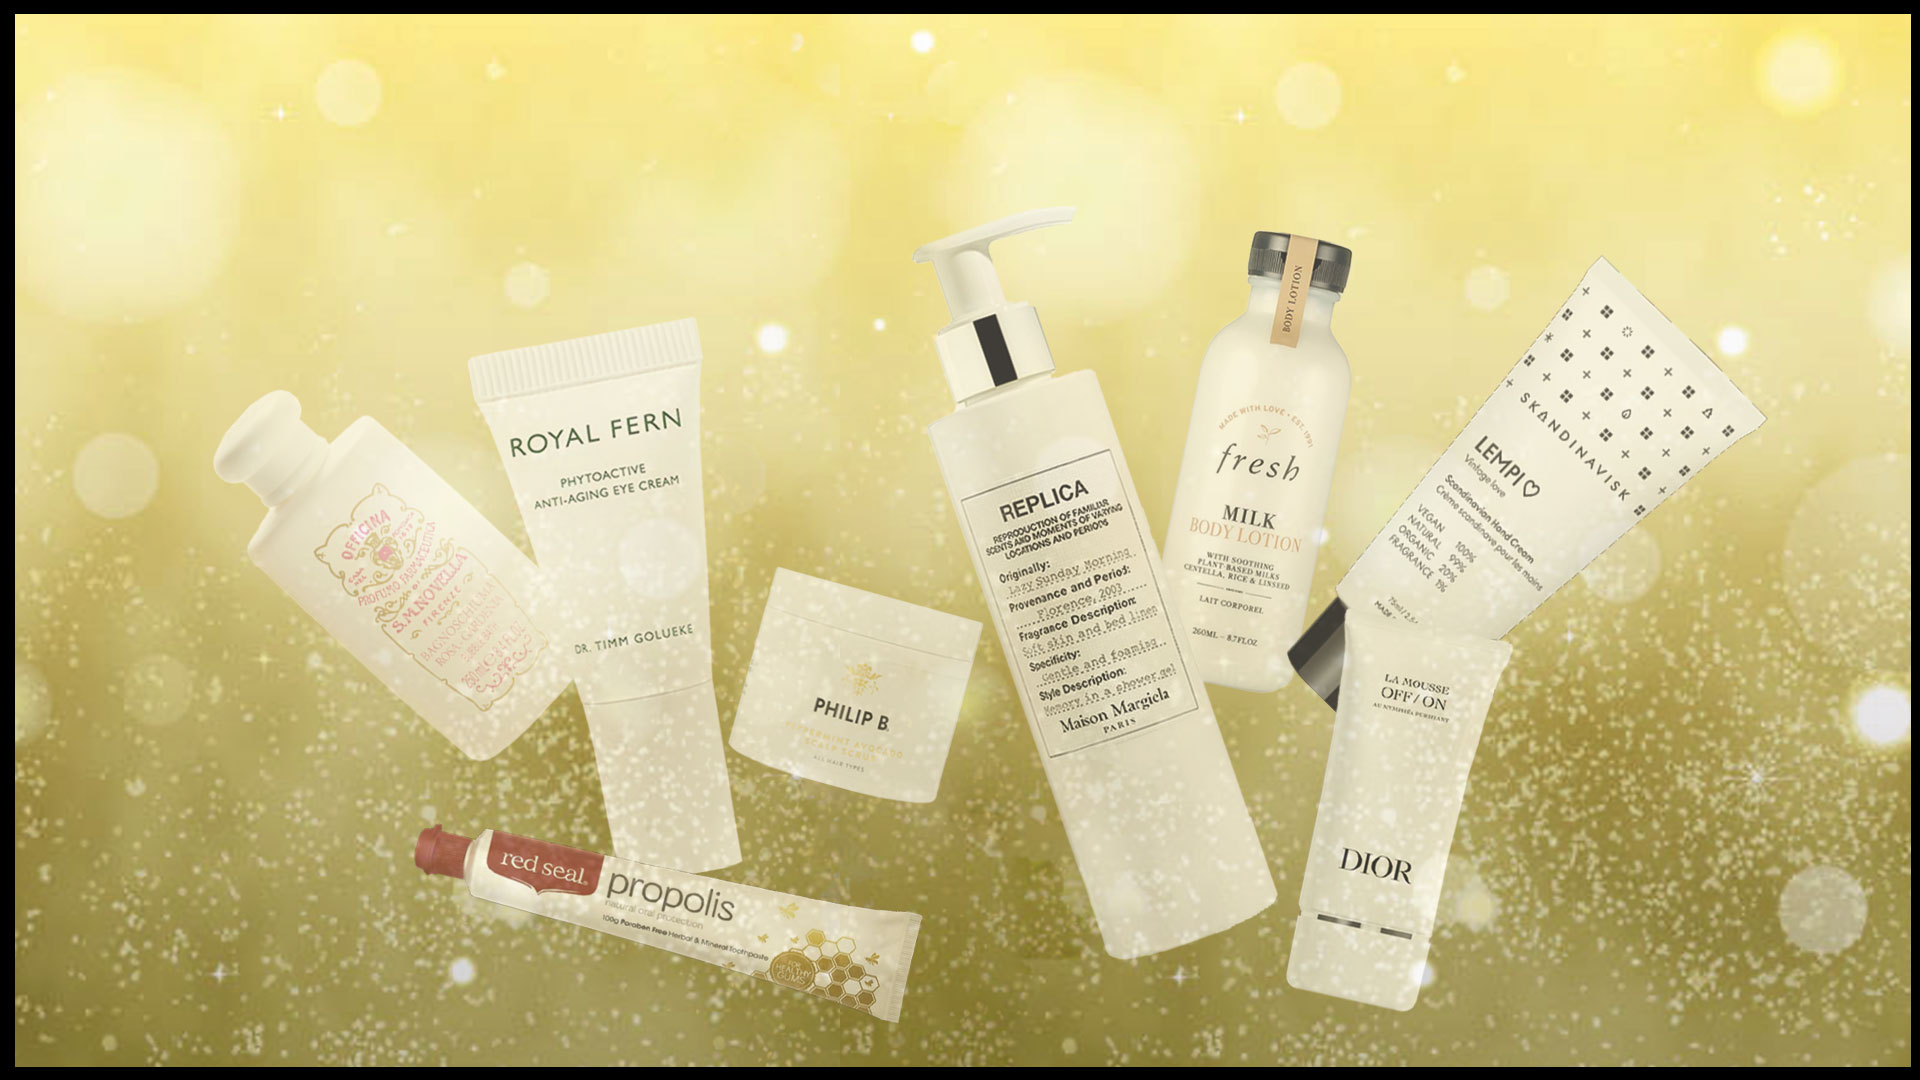 QCEG MAG || BEAUTY-BLOG #27 - ALL WE NEED ARE THE GOLDEN BUBBLES